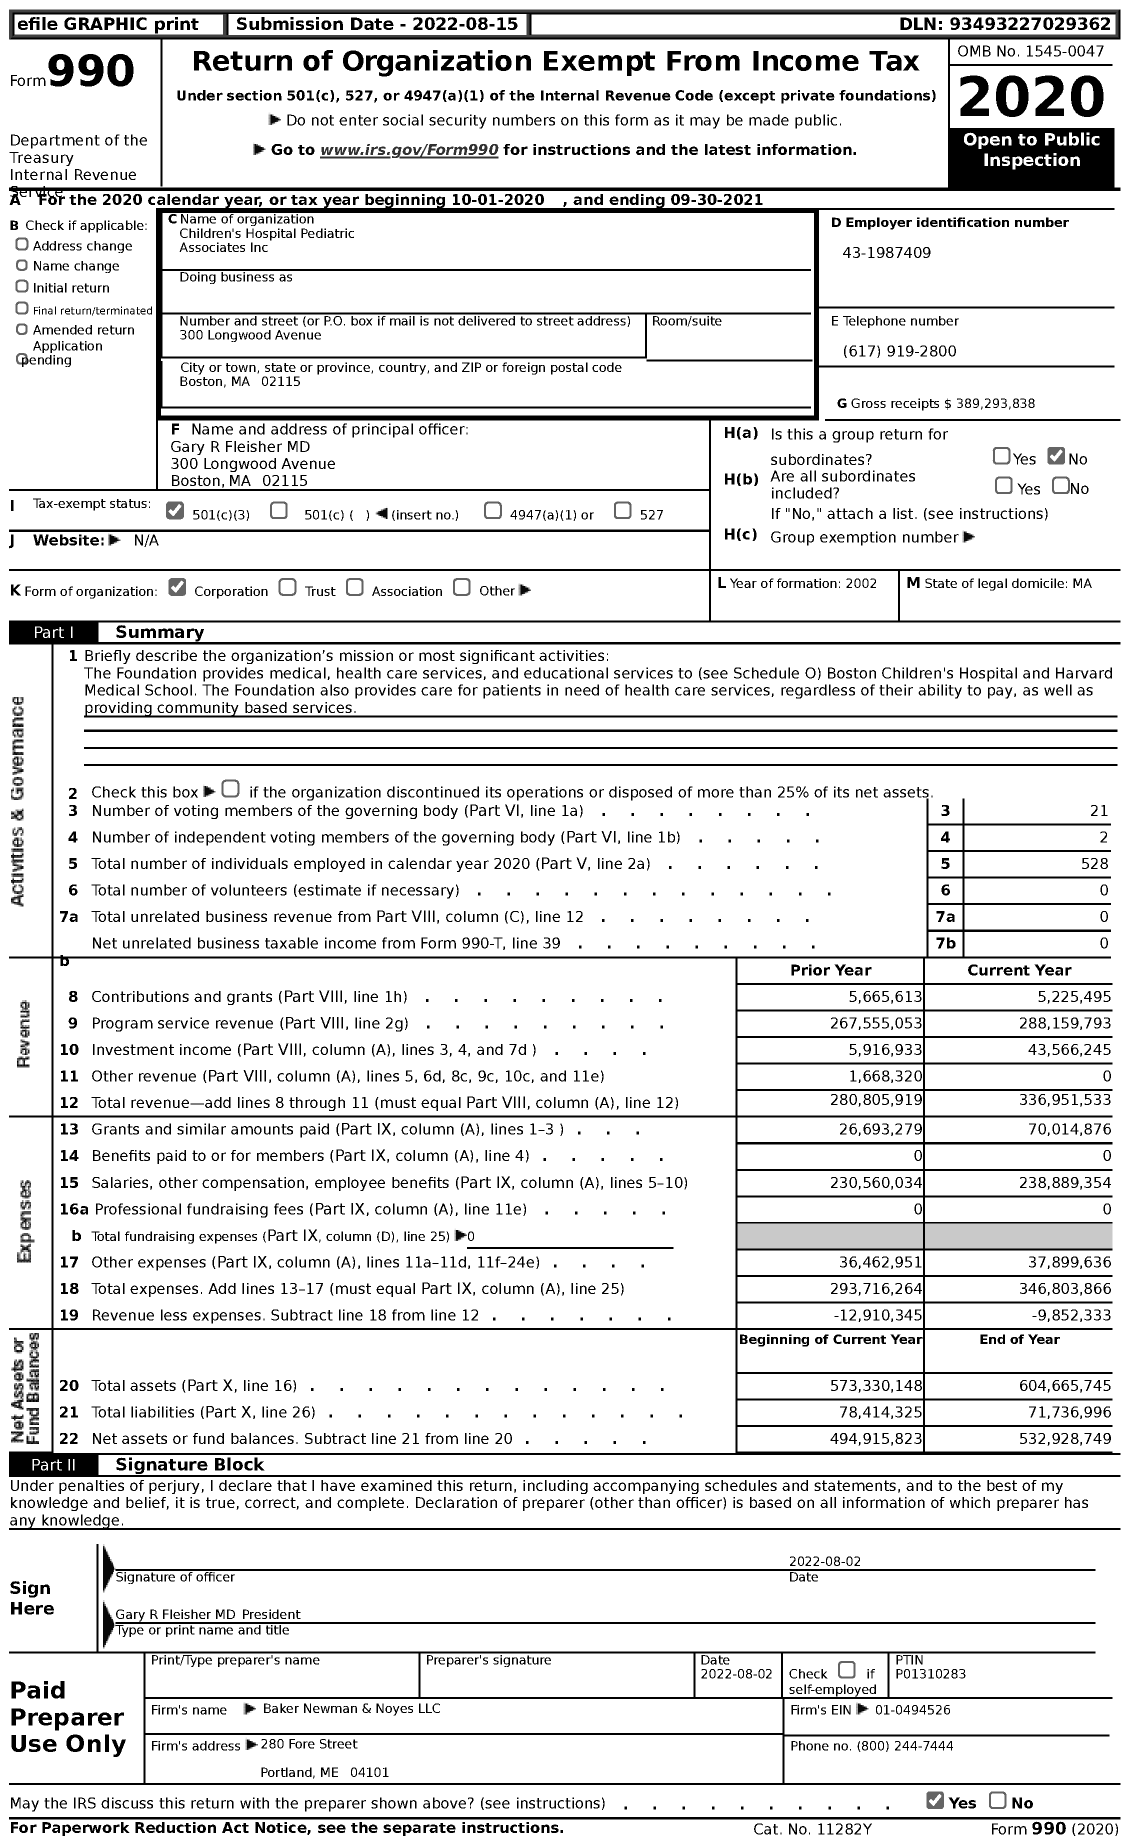 Image of first page of 2020 Form 990 for Children's Hospital Pediatric Associates (BCH)